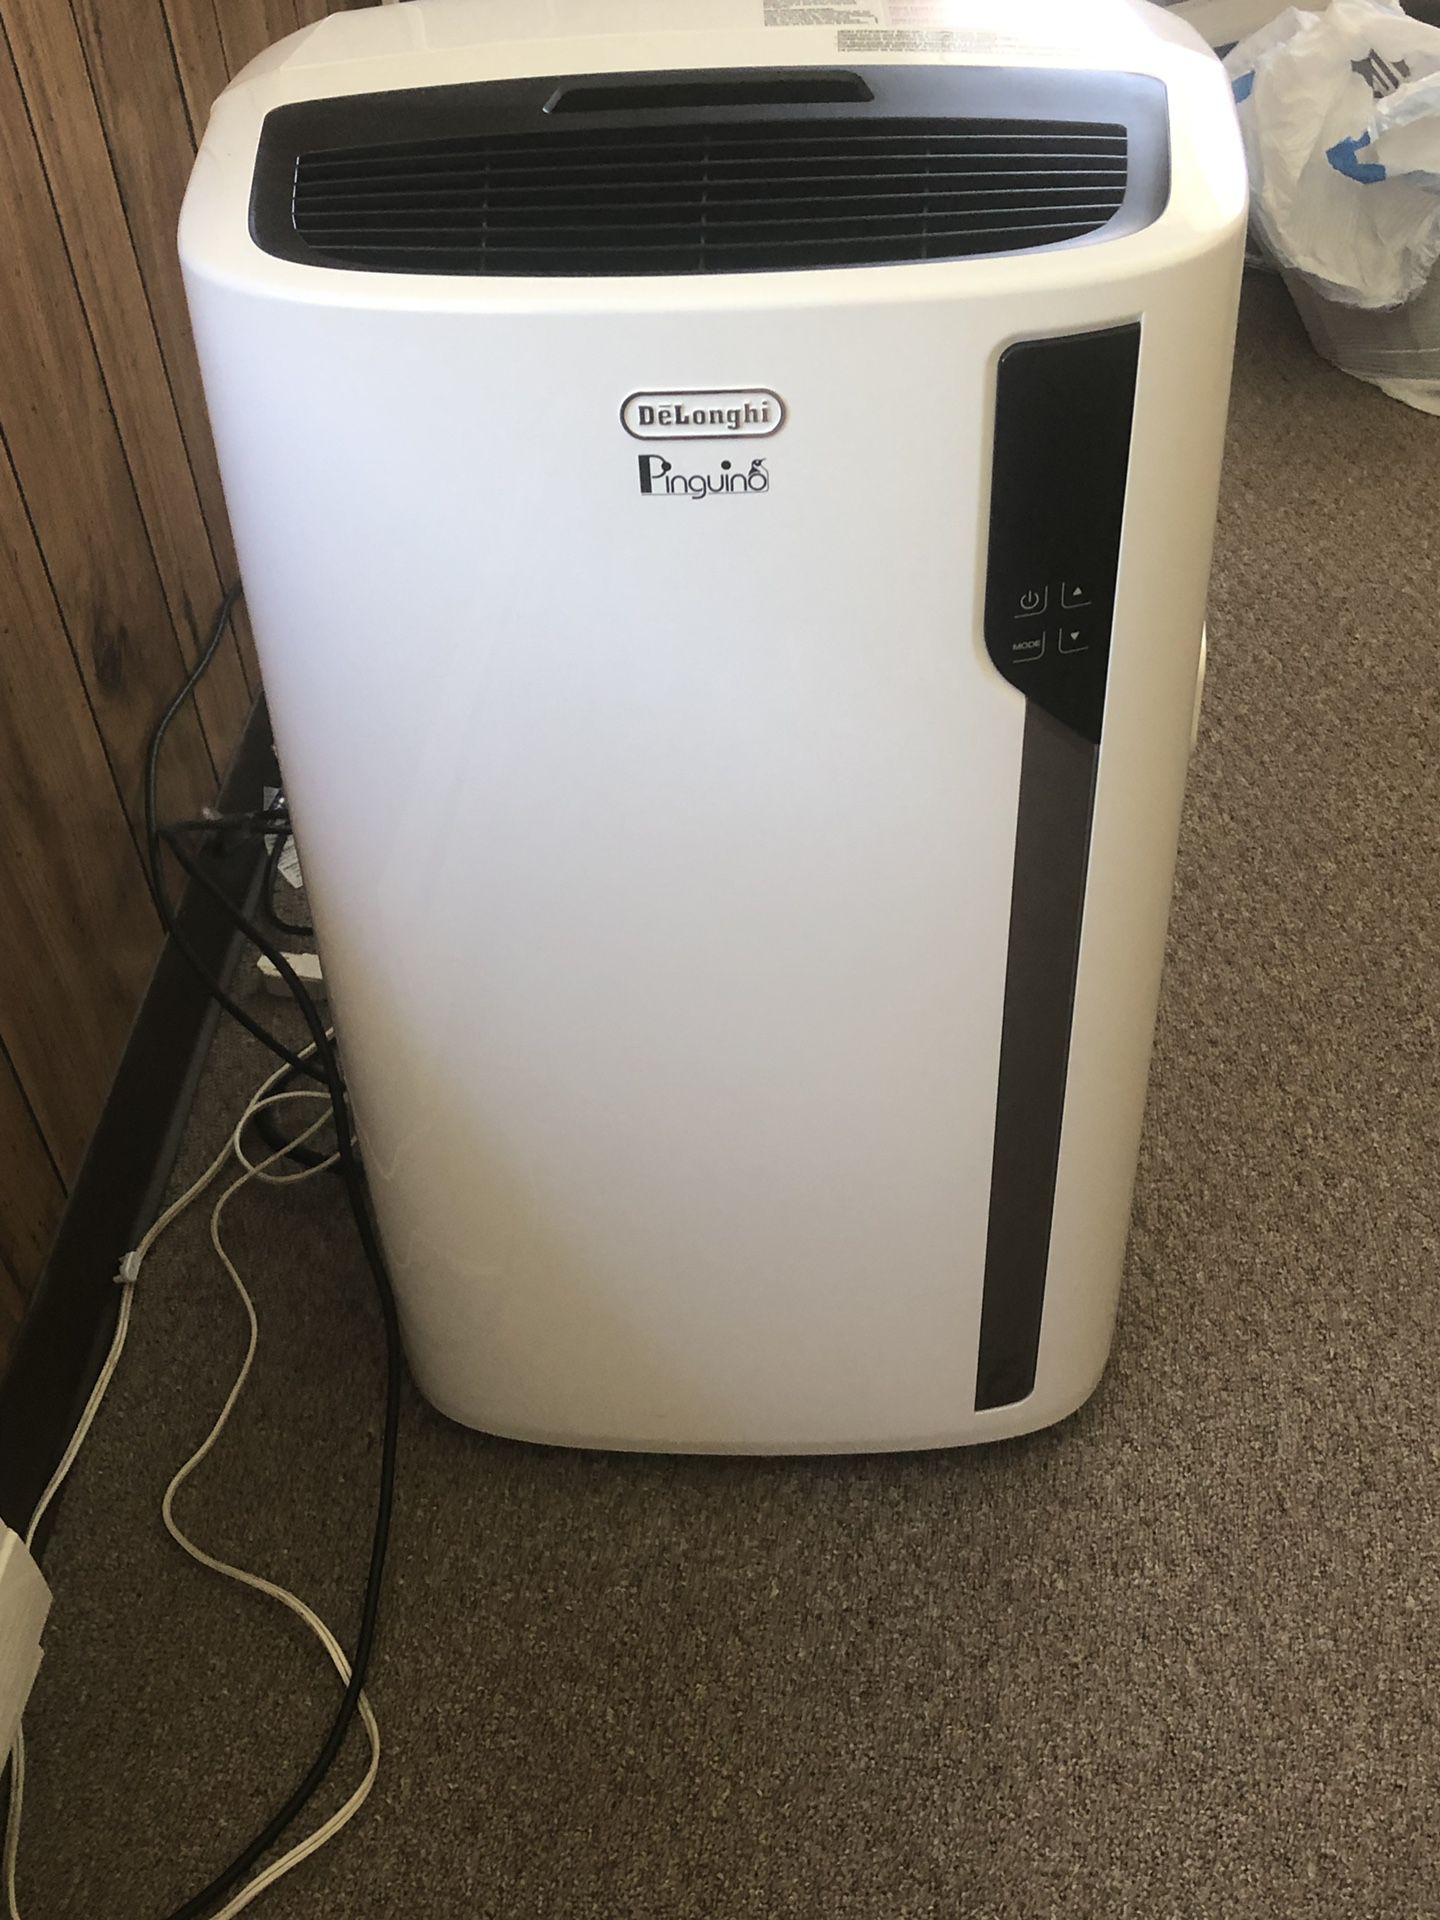 DeLonghi portable air conditioner. EL275 Series. Comes with manual, remote, storage cover, and all installation / venting accessories. Purchased J